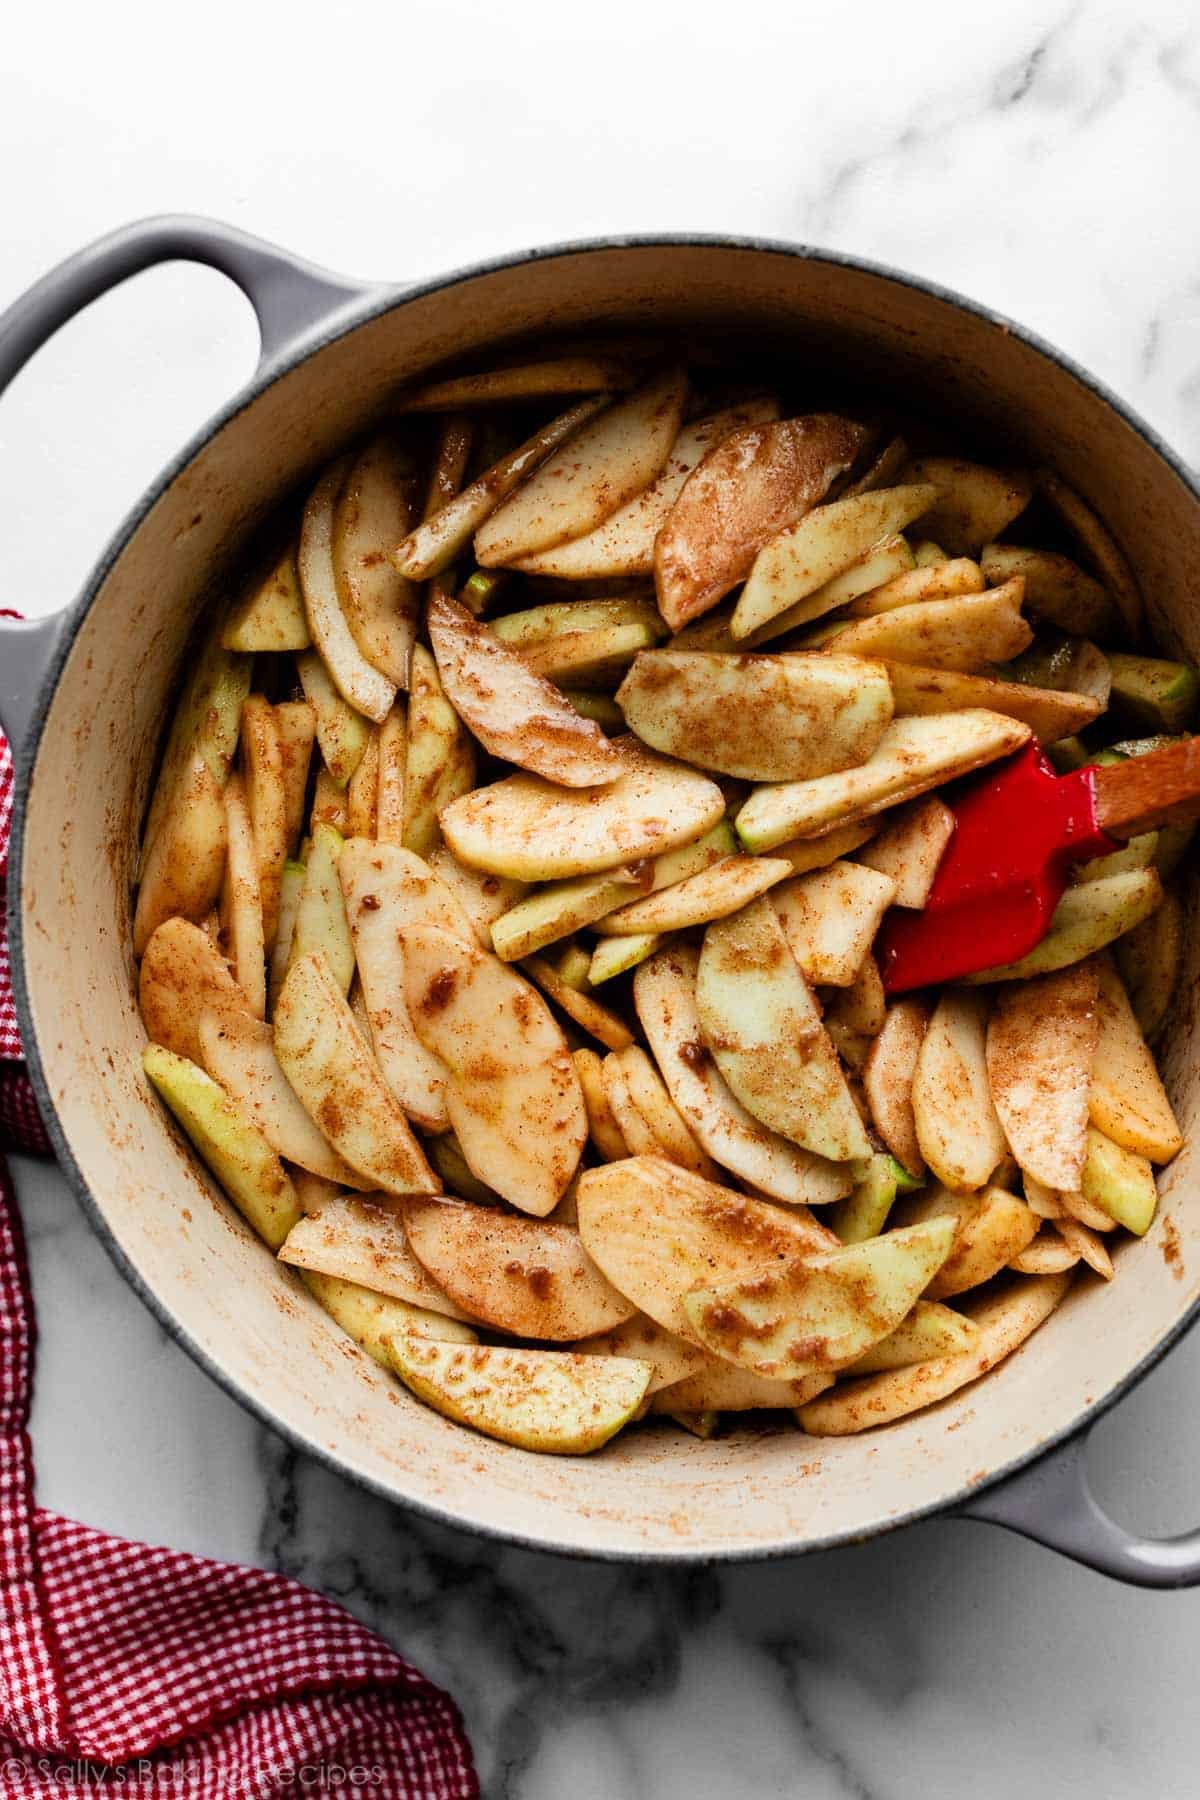 sliced apples with cinnamon and sugar on top in big pot.